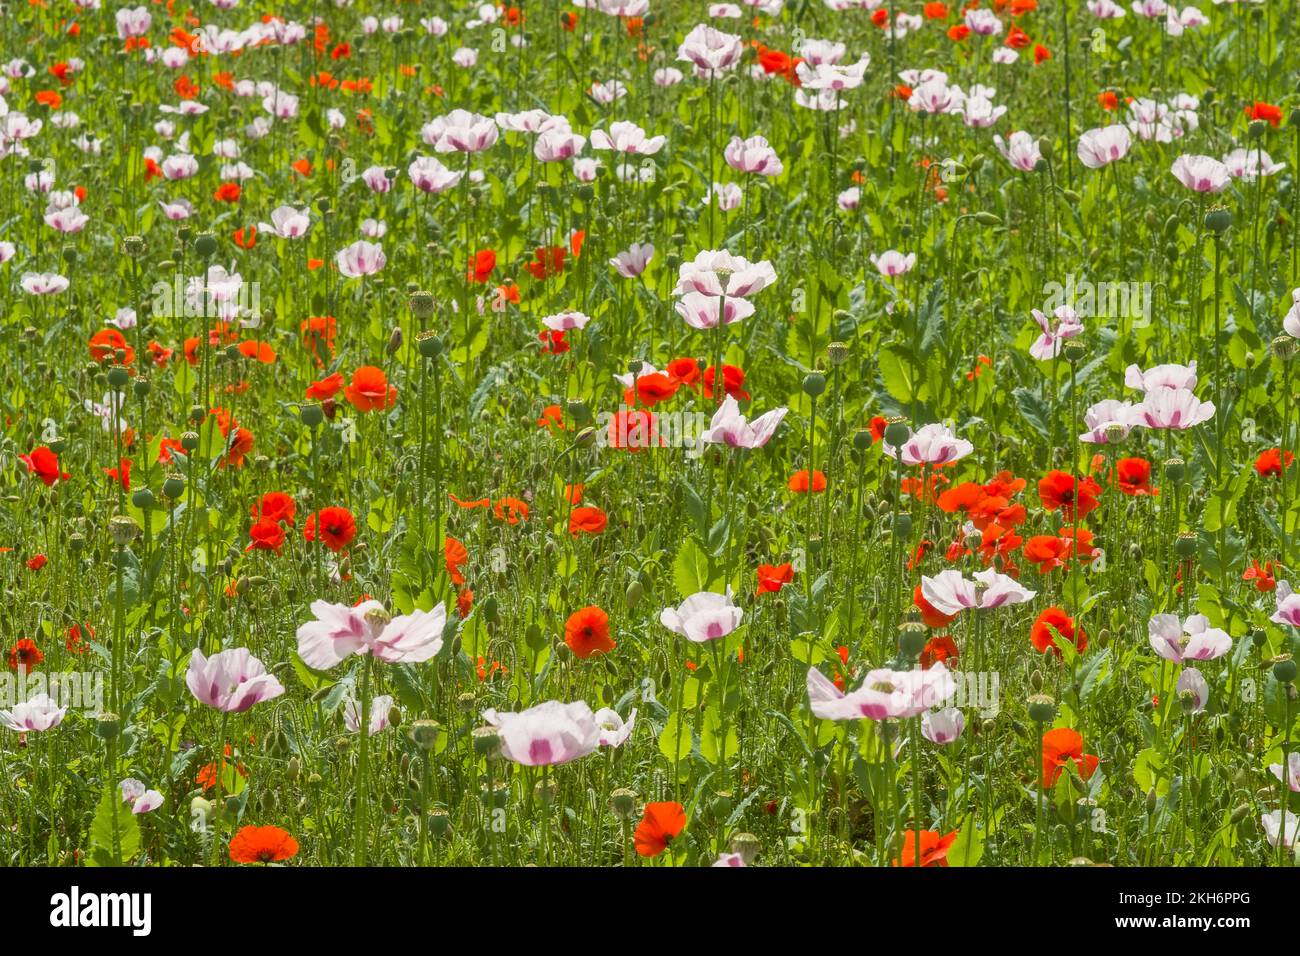 A mixed field of pink and red poppies, Papaver rhoeas and Papaver somniferum, in Summer sunshine Stock Photo